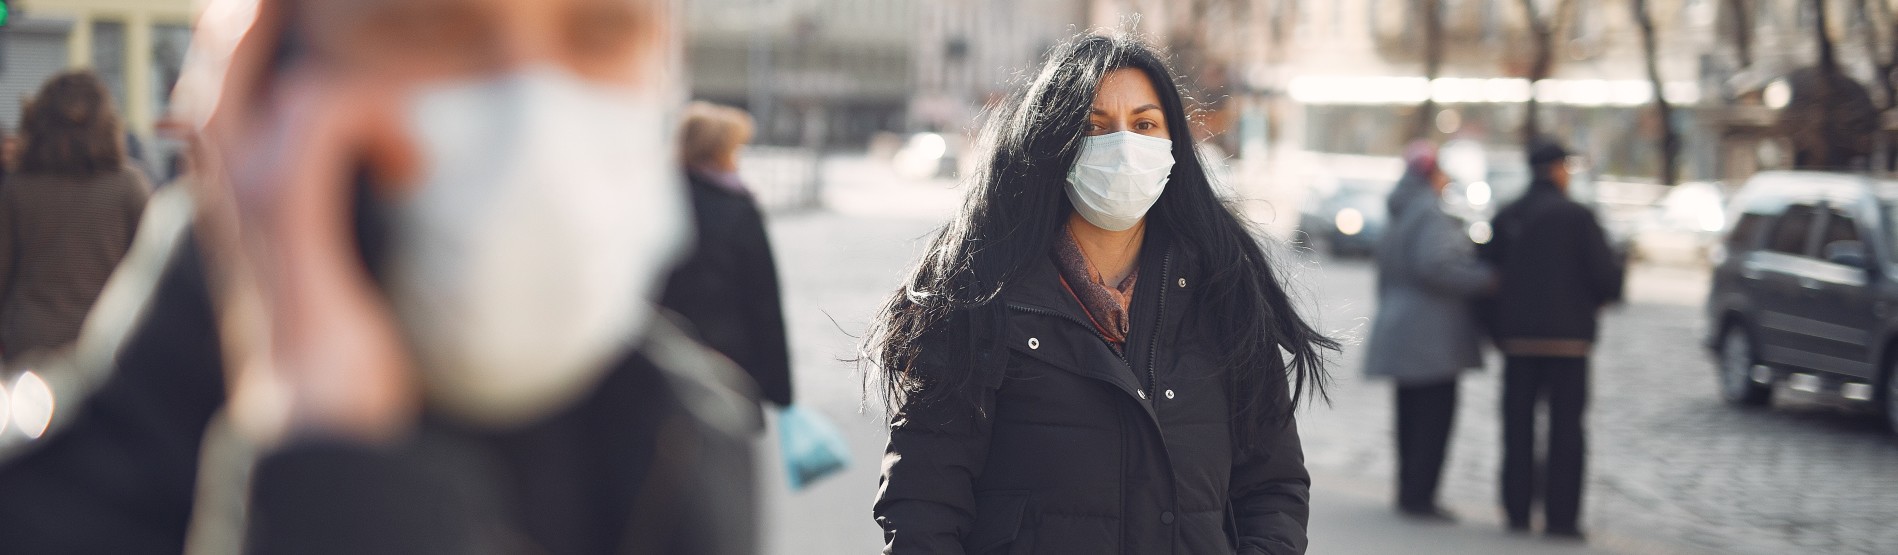 People walking in street with face mask on